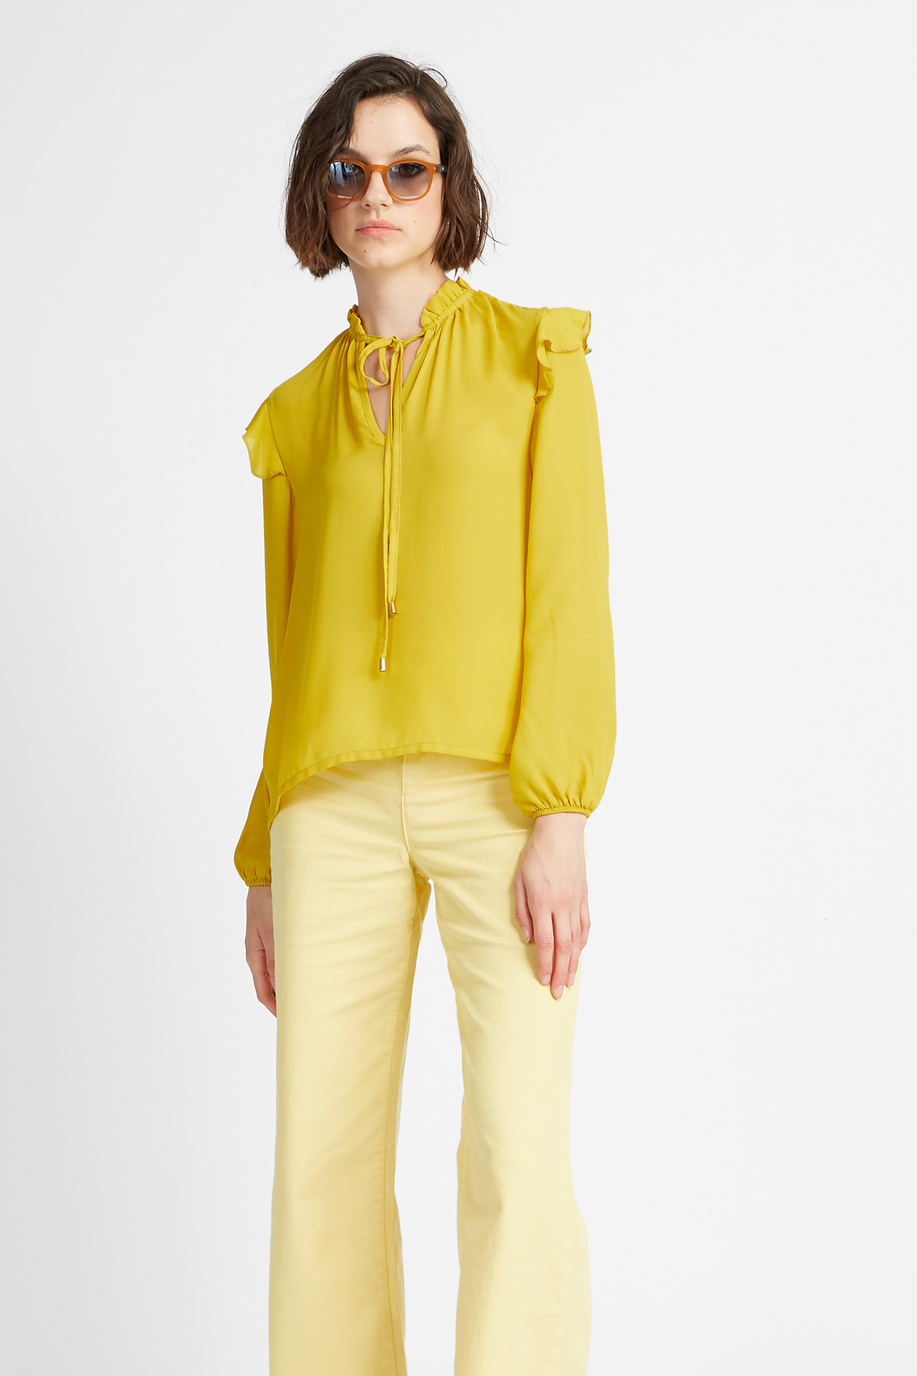 Women's long-sleeved shirt in solid color and georgette fabric Spring Weekend - Ville - Preview | La Martina - Official Online Shop